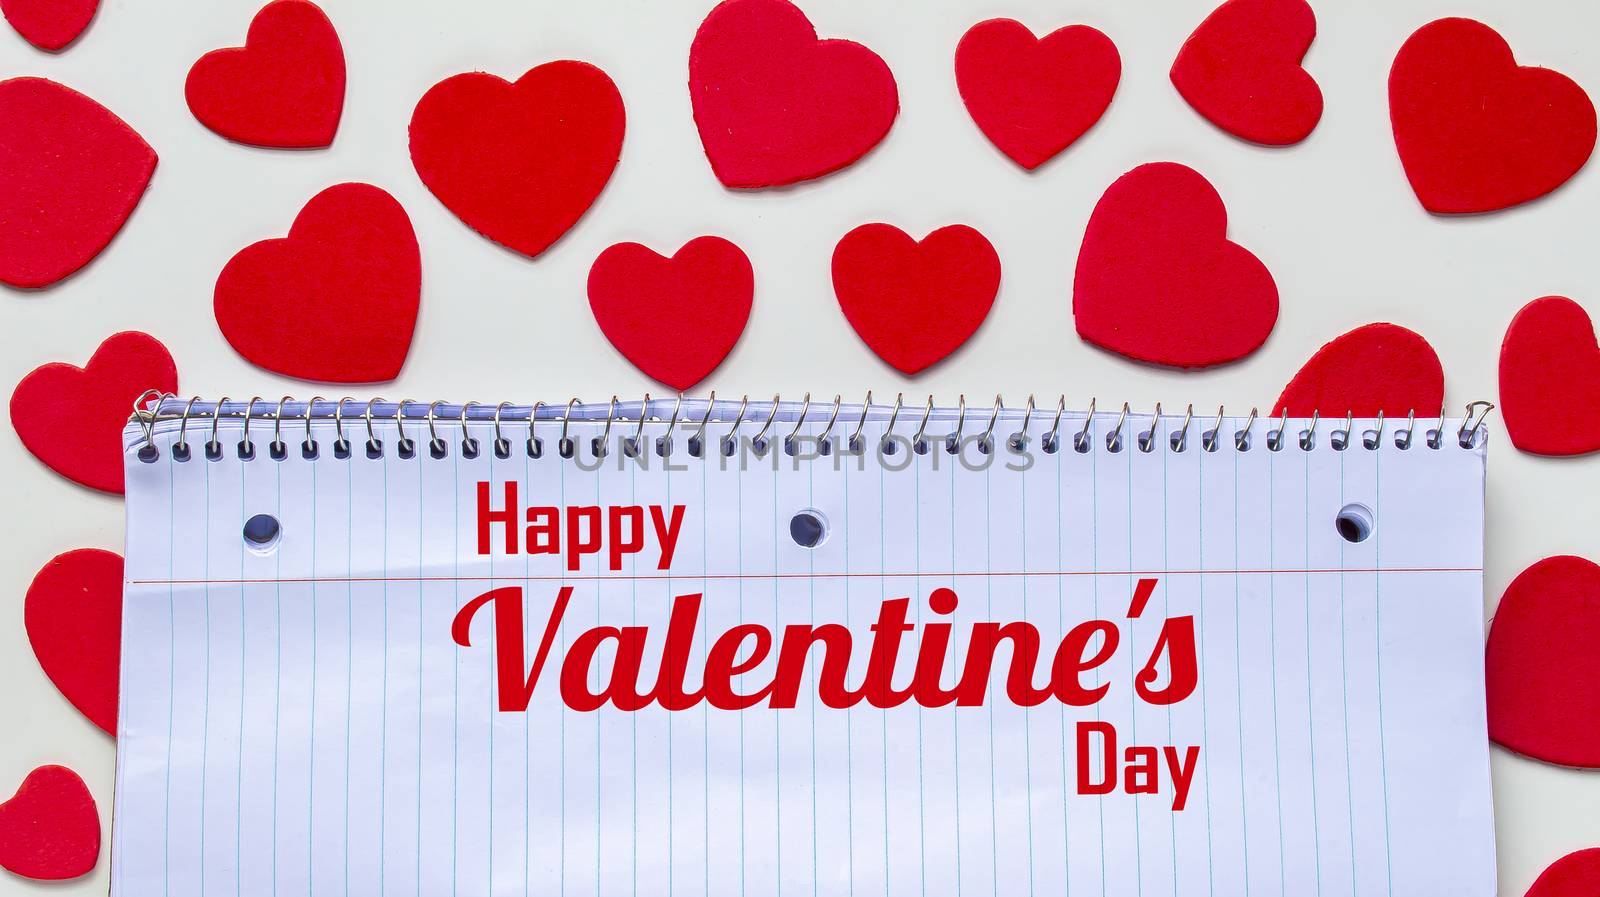 A notebook with the text: Happy Valentine's Day with hearts around by oasisamuel